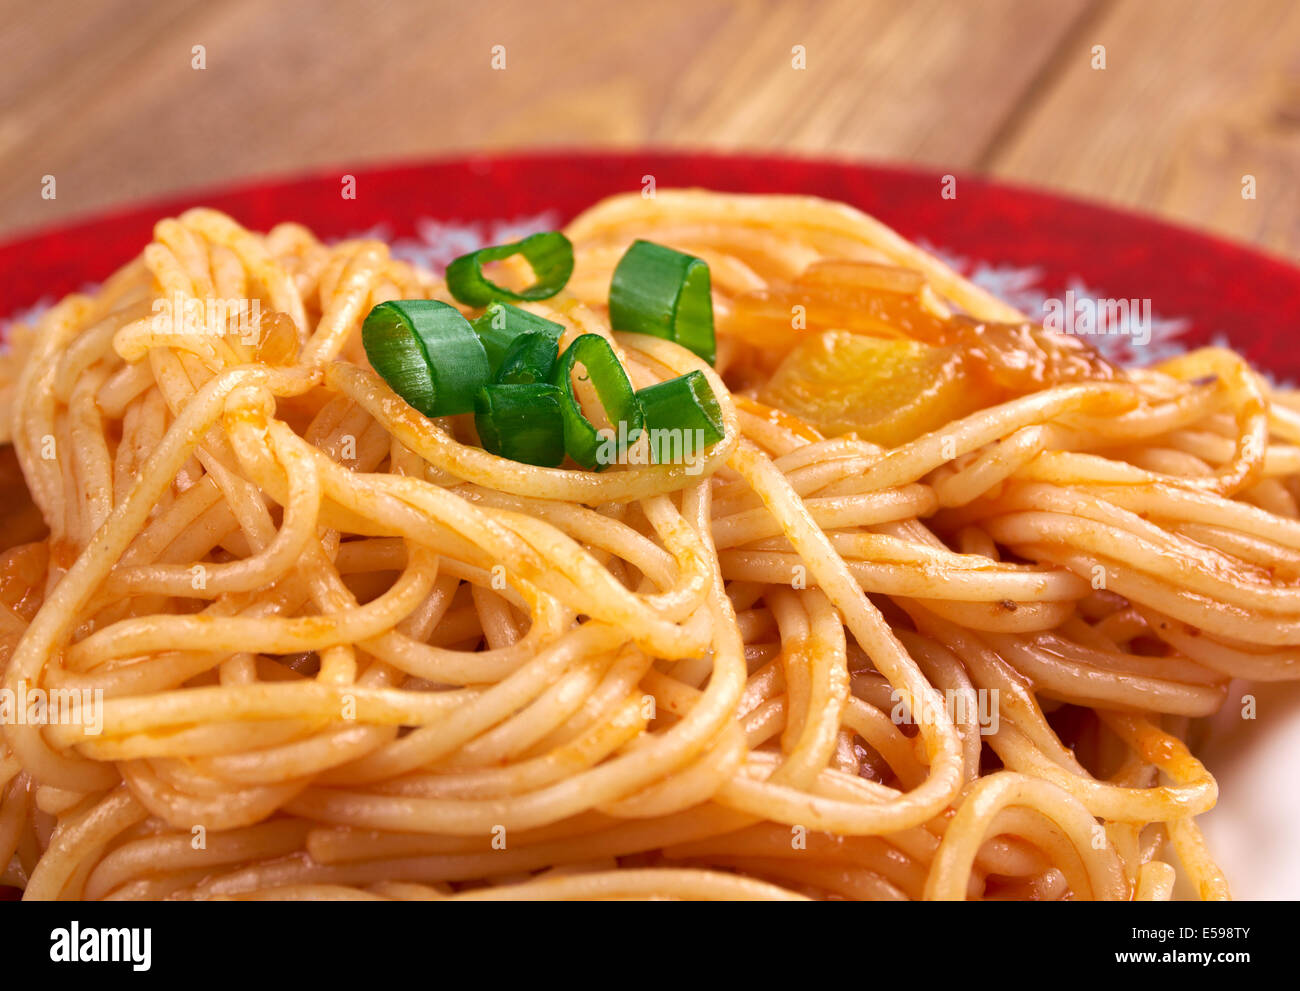 Pasta asciutta -   pastasciutta cooked pasta is plated and served with a complementary sauce or condiment Stock Photo